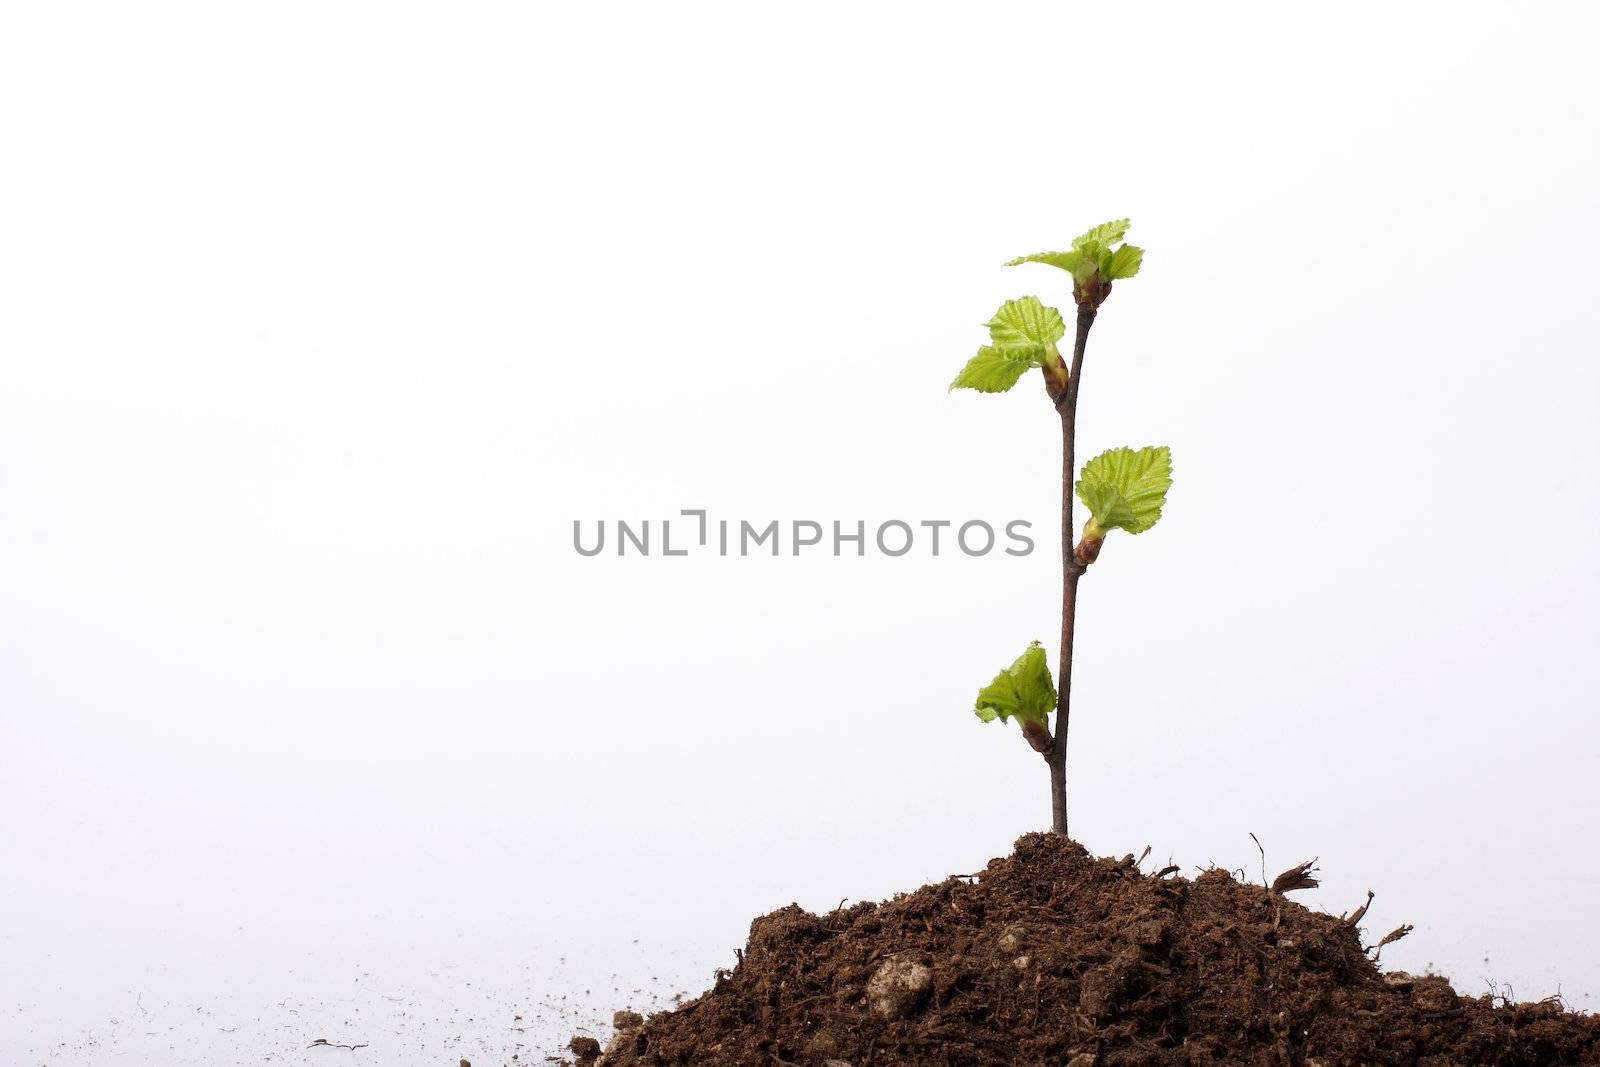 A small sapling growing from a pile of dirt, isolated on white, concept shot depicting hope